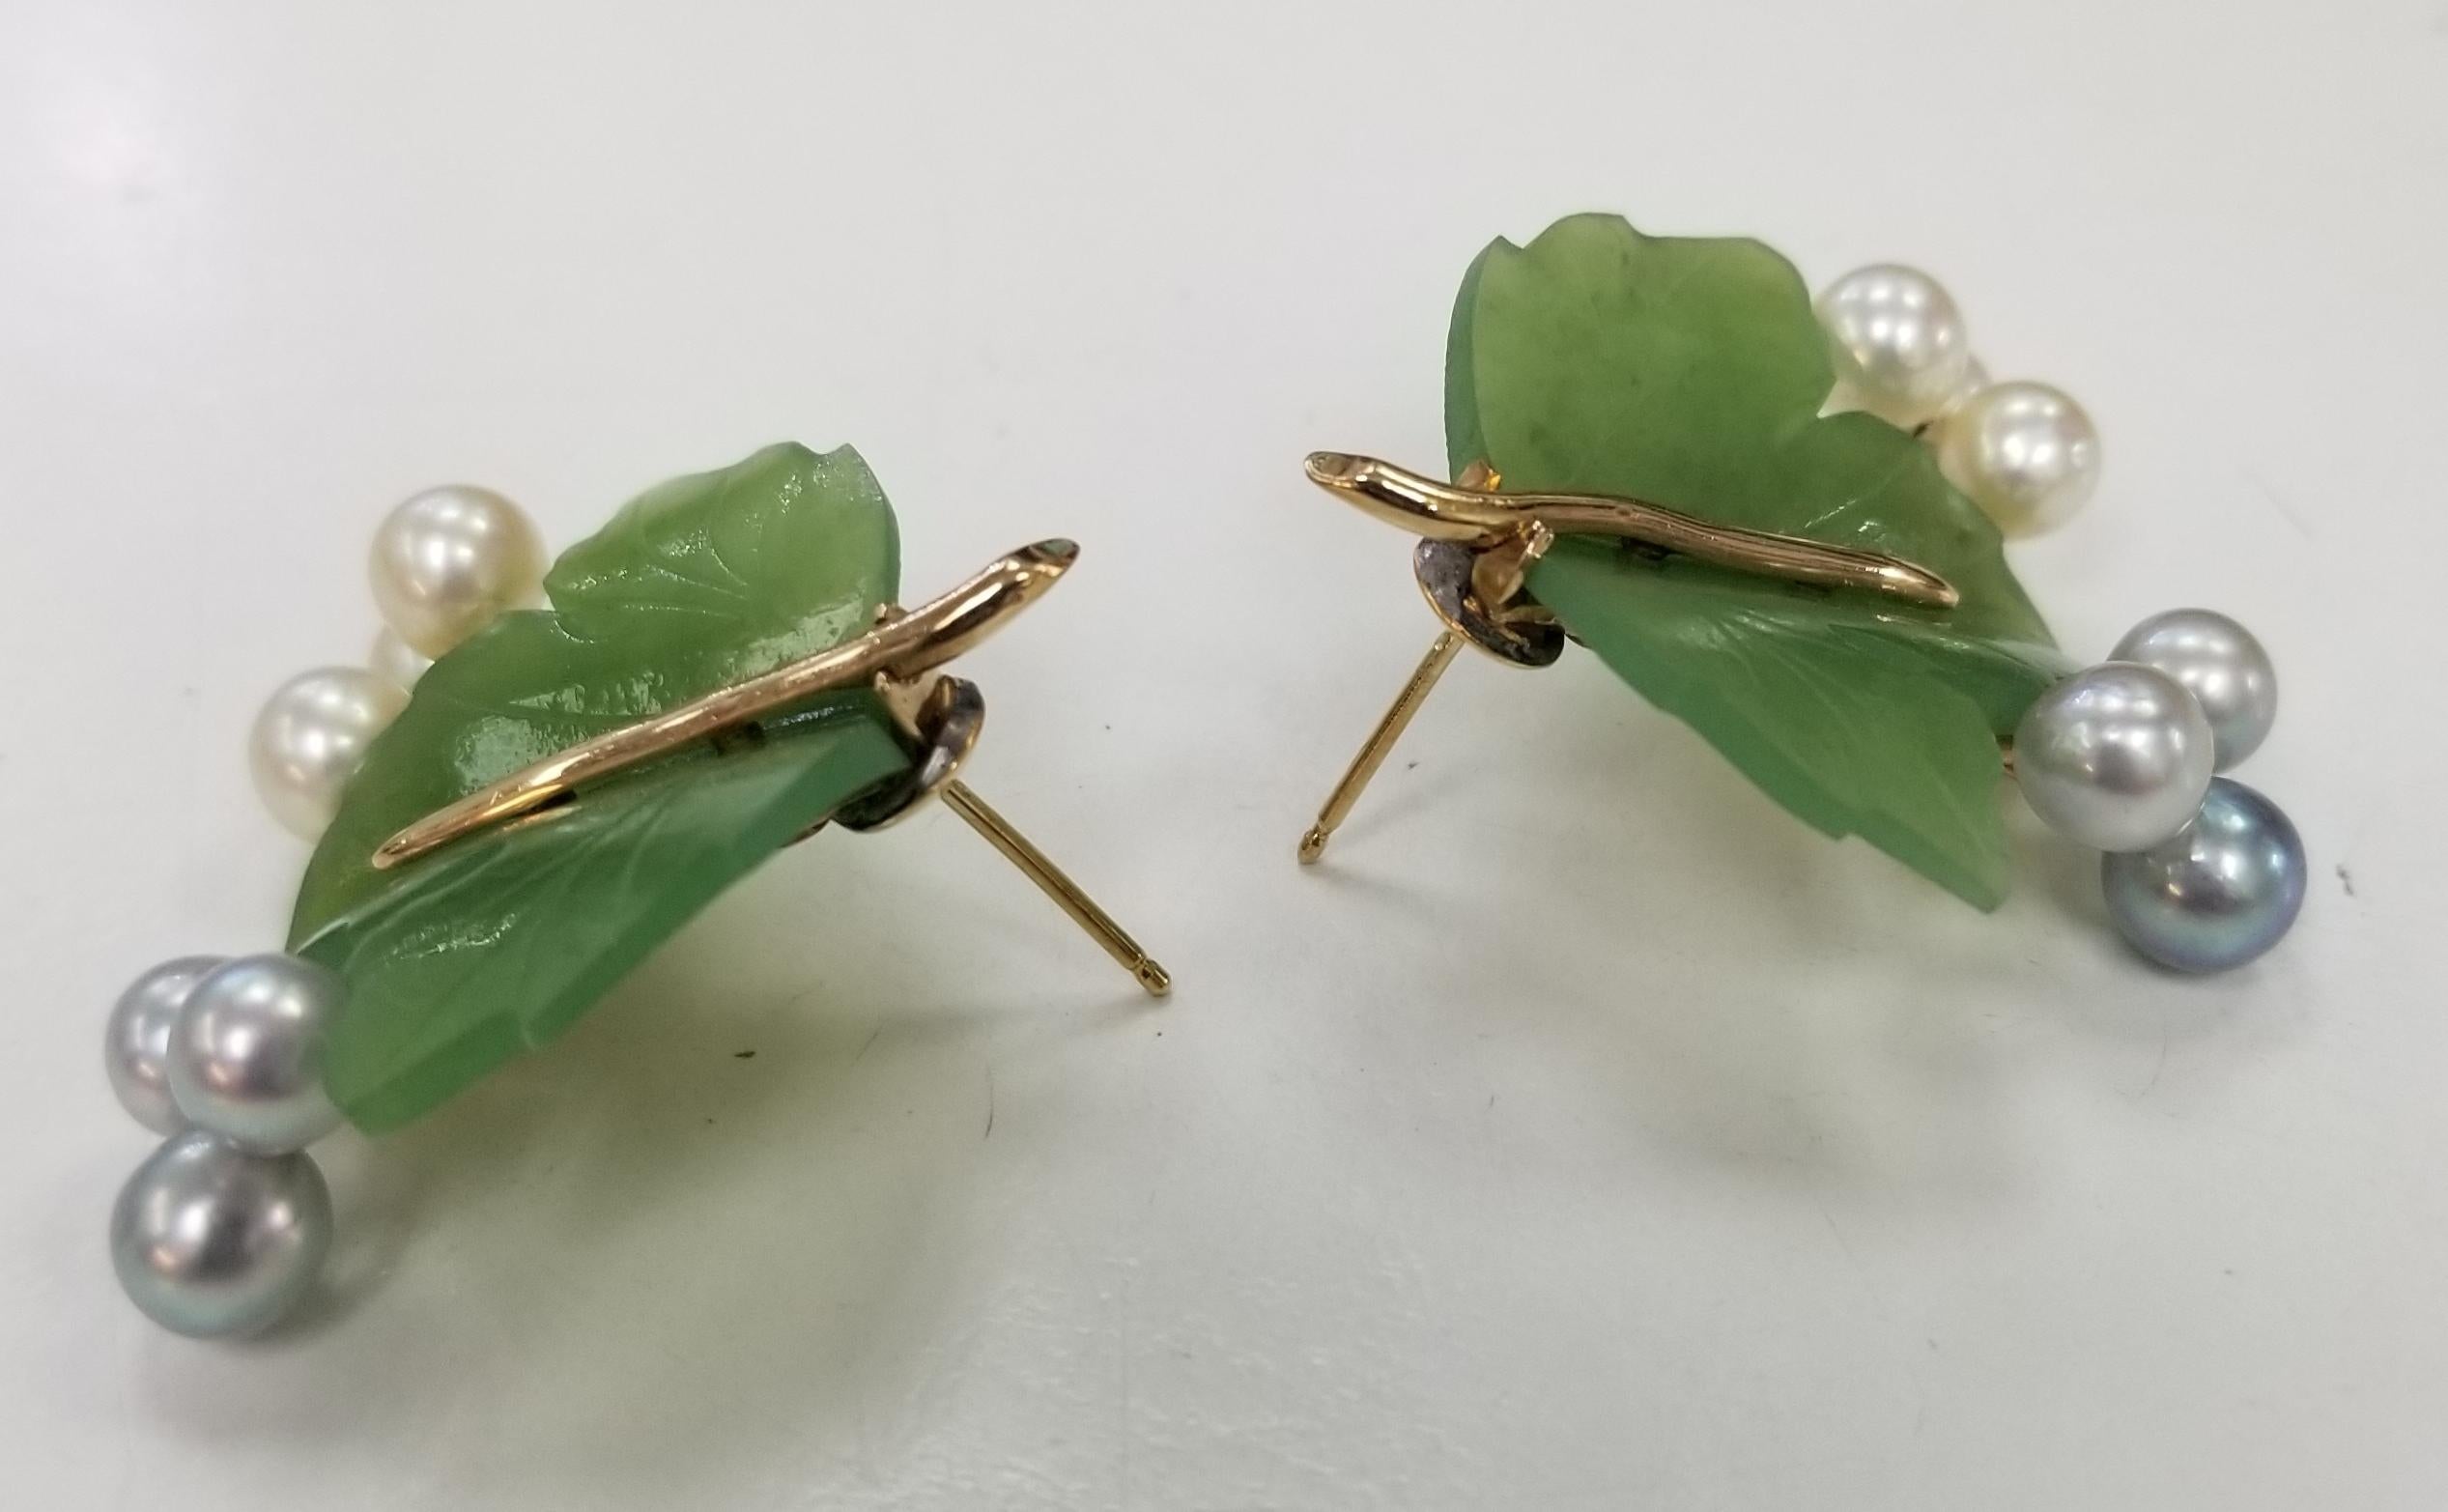 This gorgeous, Mid Century vintage earrings,  features carved nephrite and pearls in a 14 karat gold floral motif. 
There are two (2) carved nephrite jade leaves, each carved by hand and 12 pearls measuring 5-6mm(the piece is old enough that the